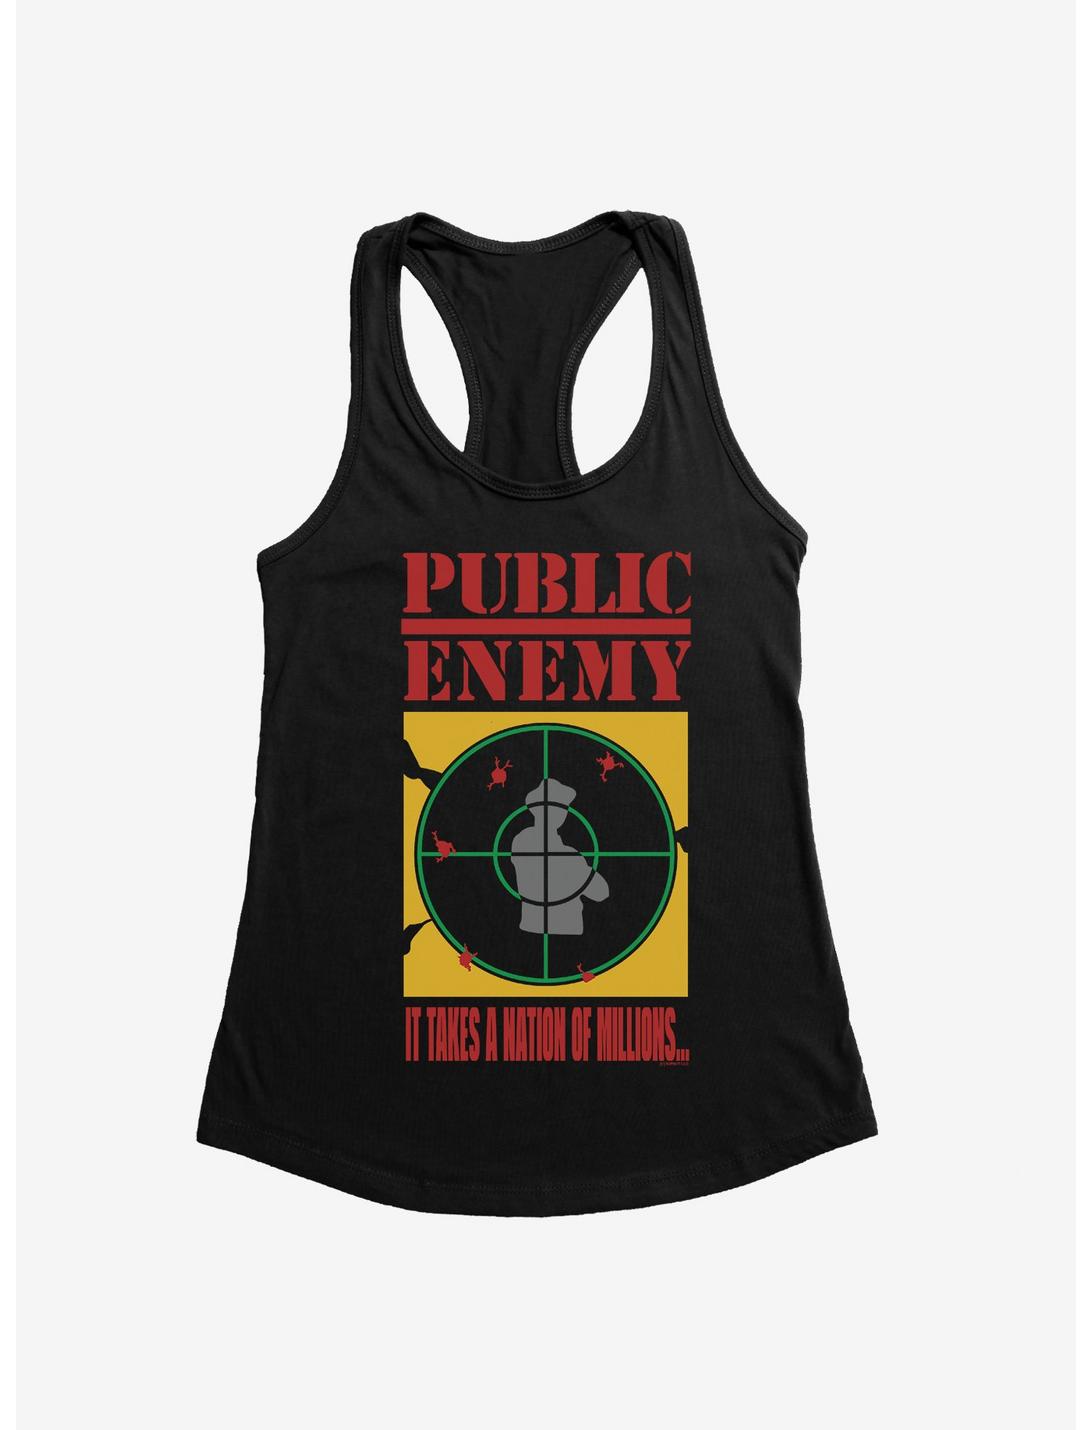 Public Enemy Takes A Nation Of Millions Girls Tank, BLACK, hi-res